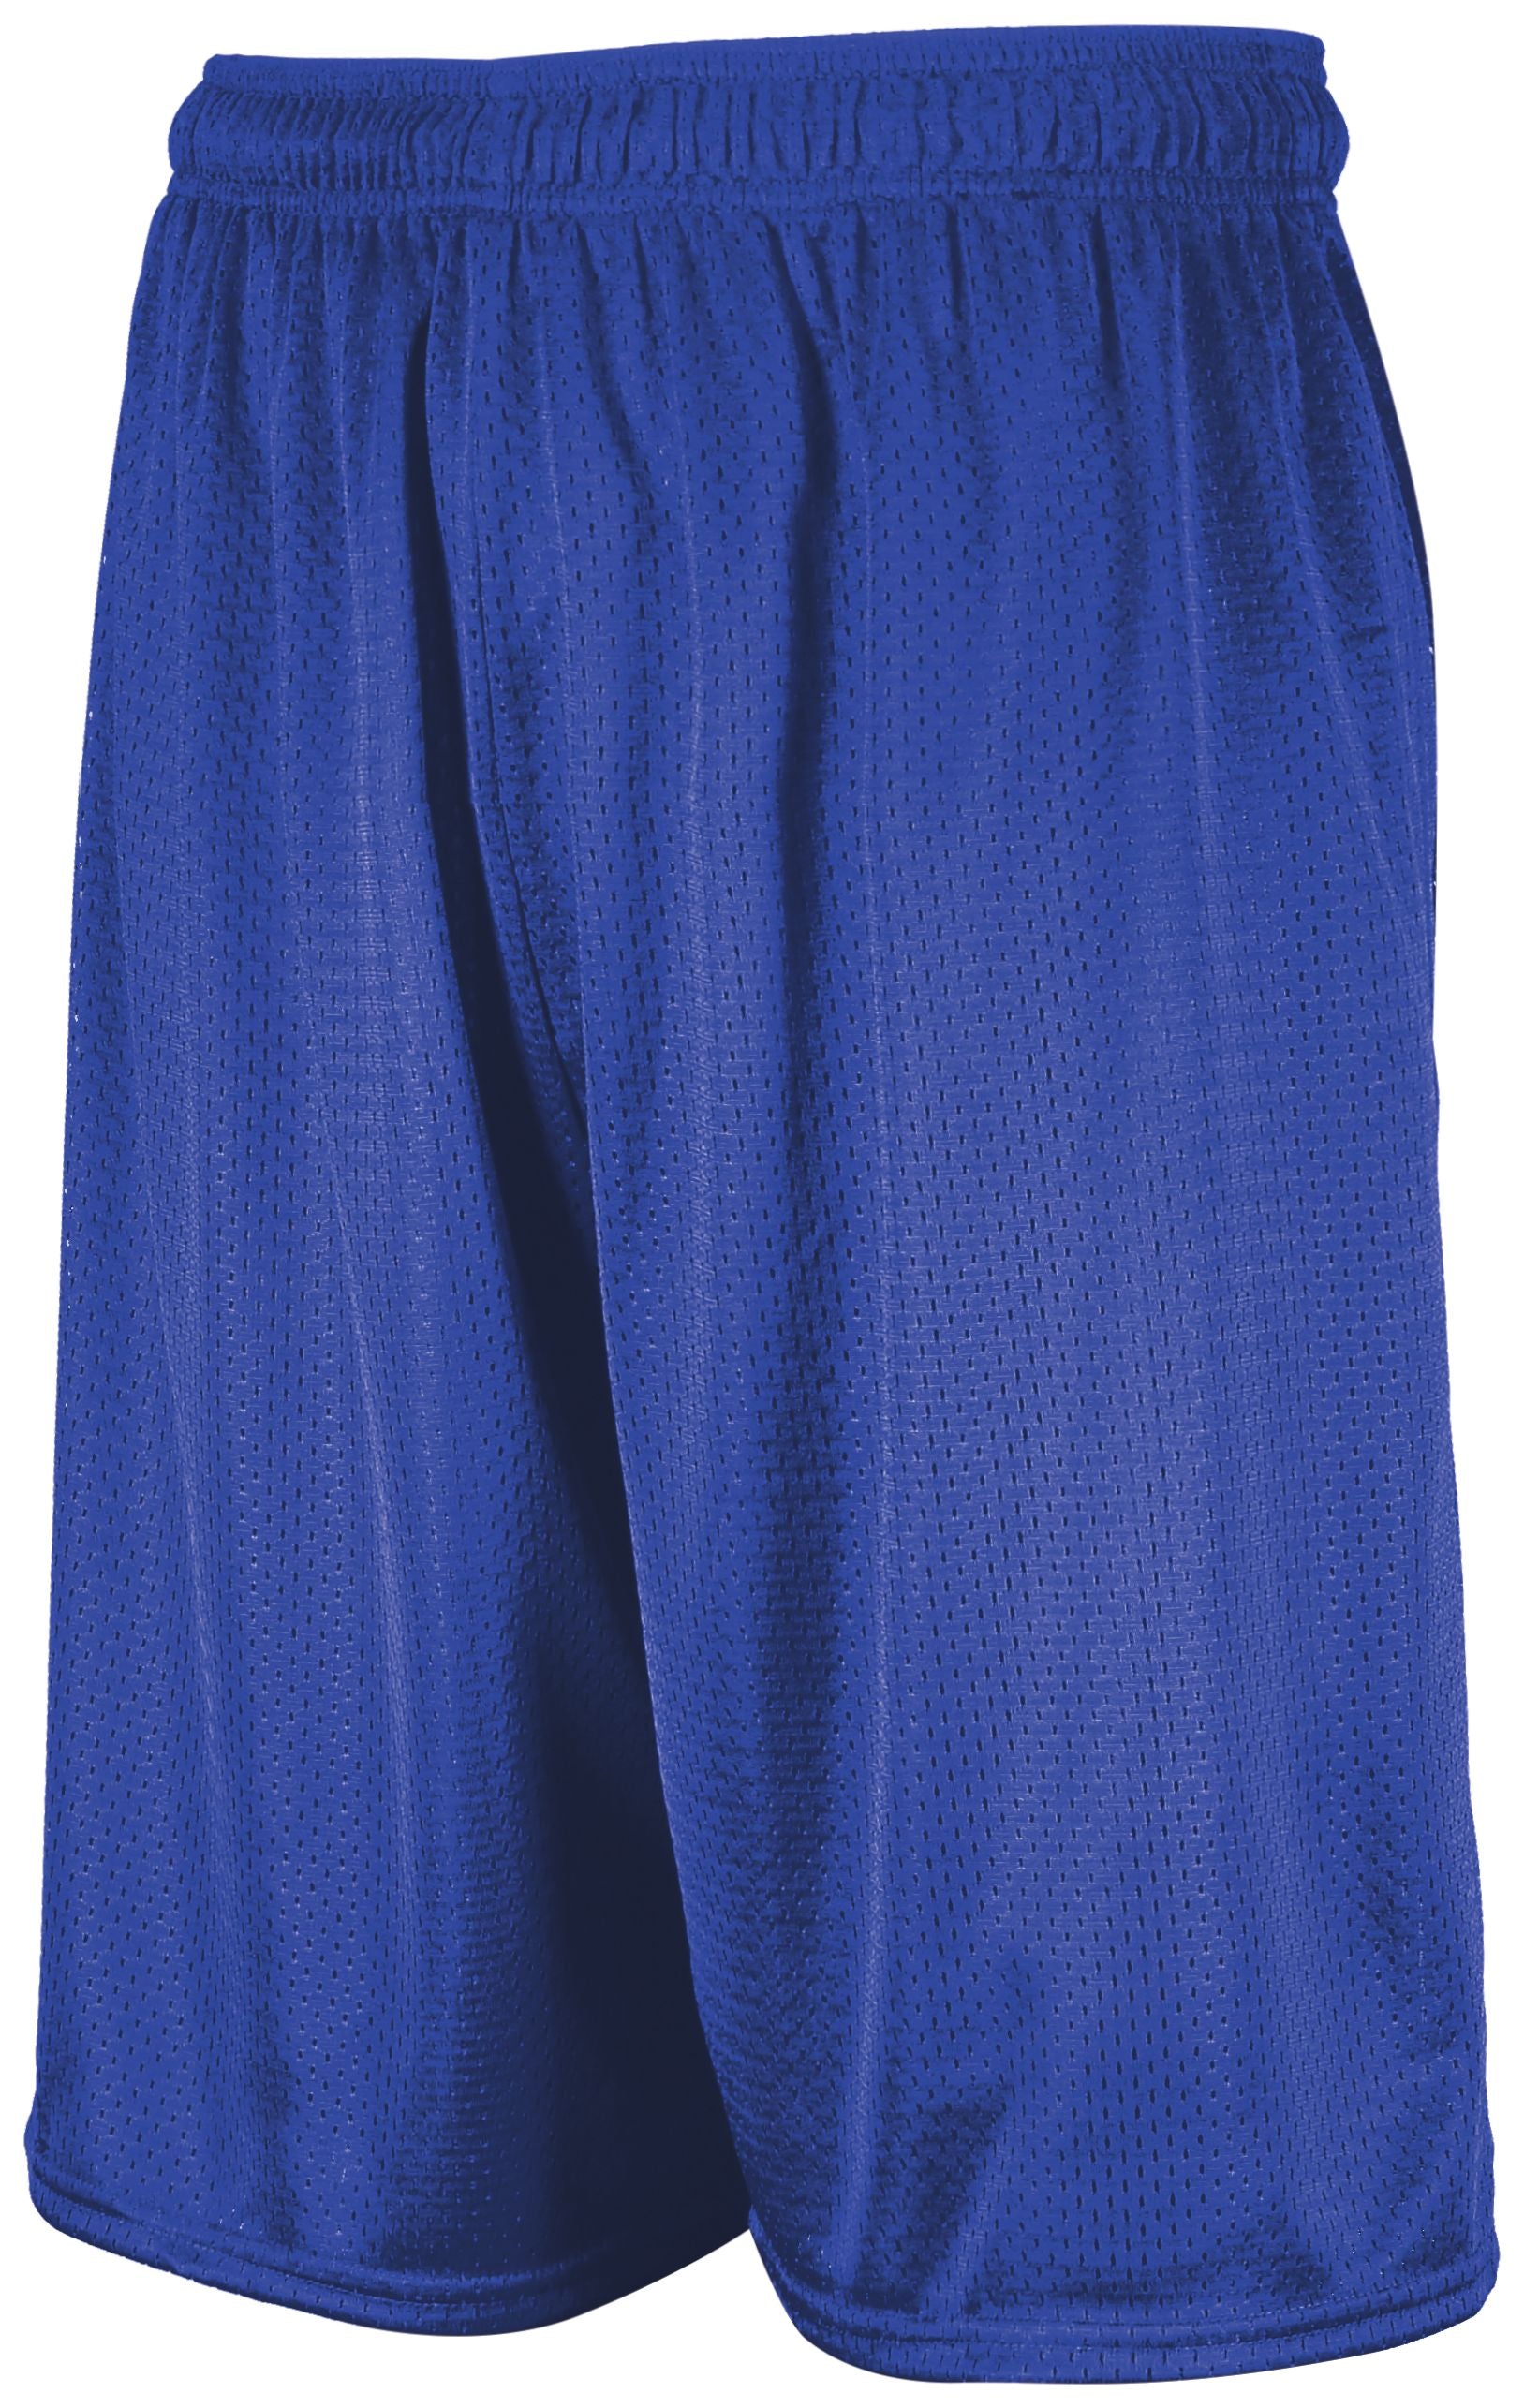 Russell Athletic Dri-Power Mesh Shorts in Royal  -Part of the Adult, Adult-Shorts, Russell-Athletic-Products product lines at KanaleyCreations.com